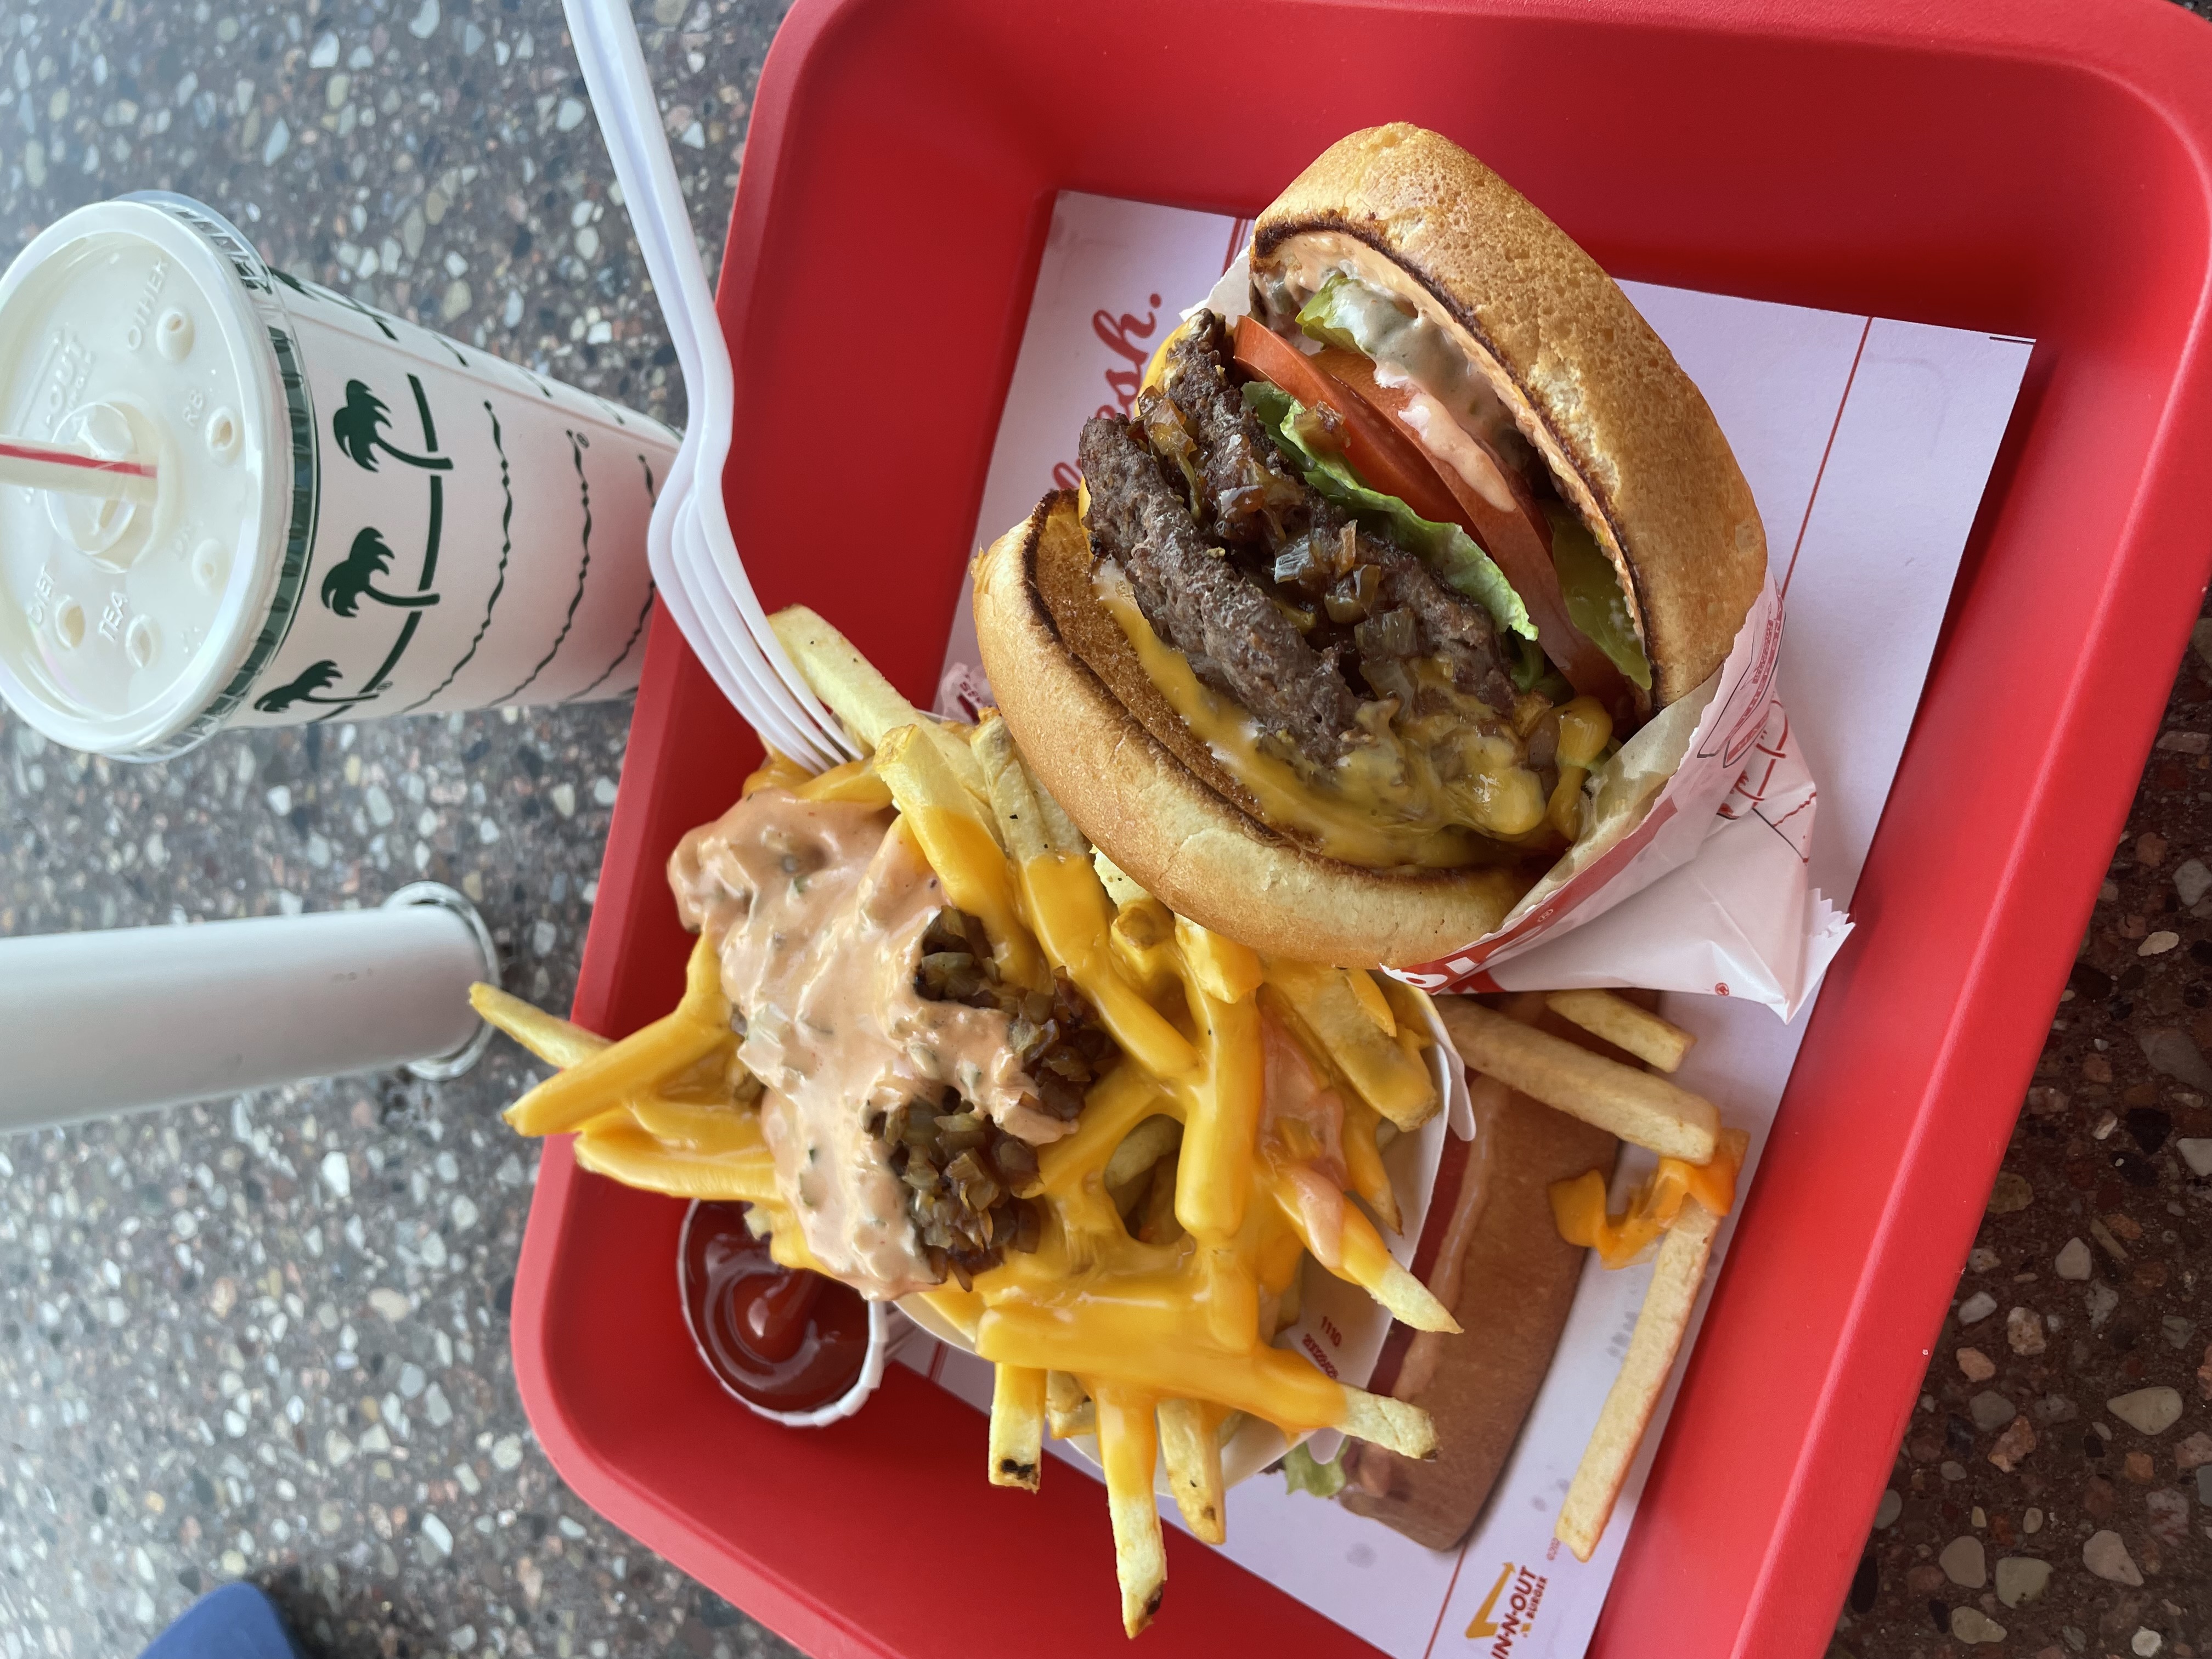 In-N-Out burger set - Animal Style!